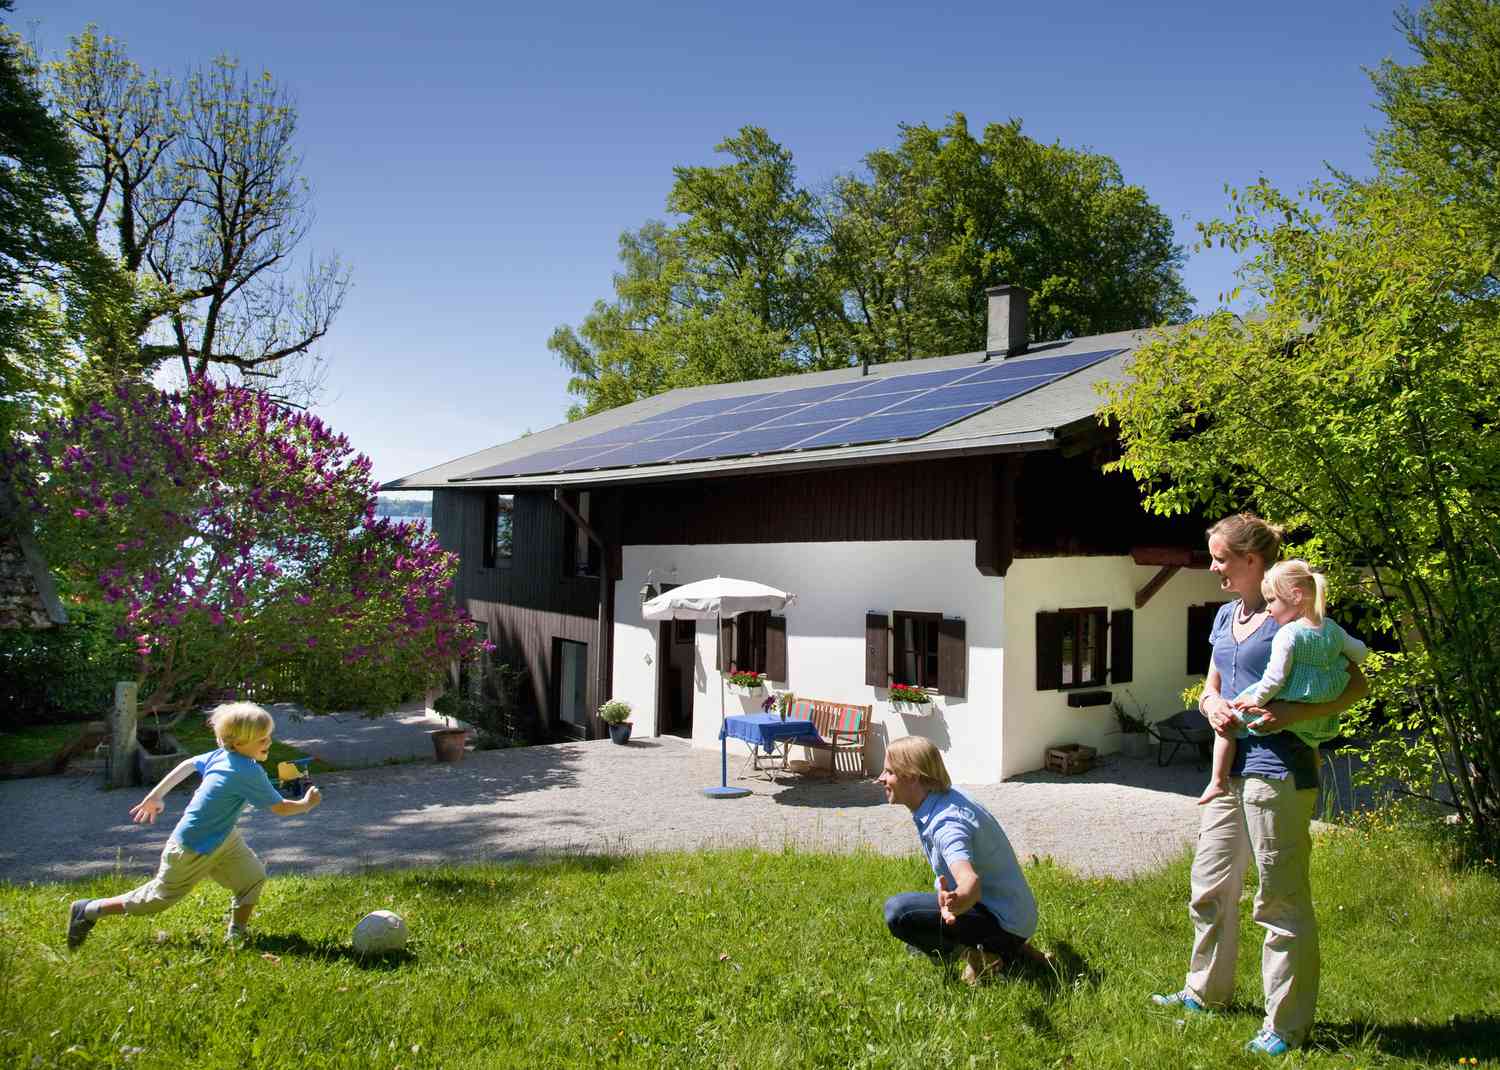 family playing outside in front of their home that has a solar panel system